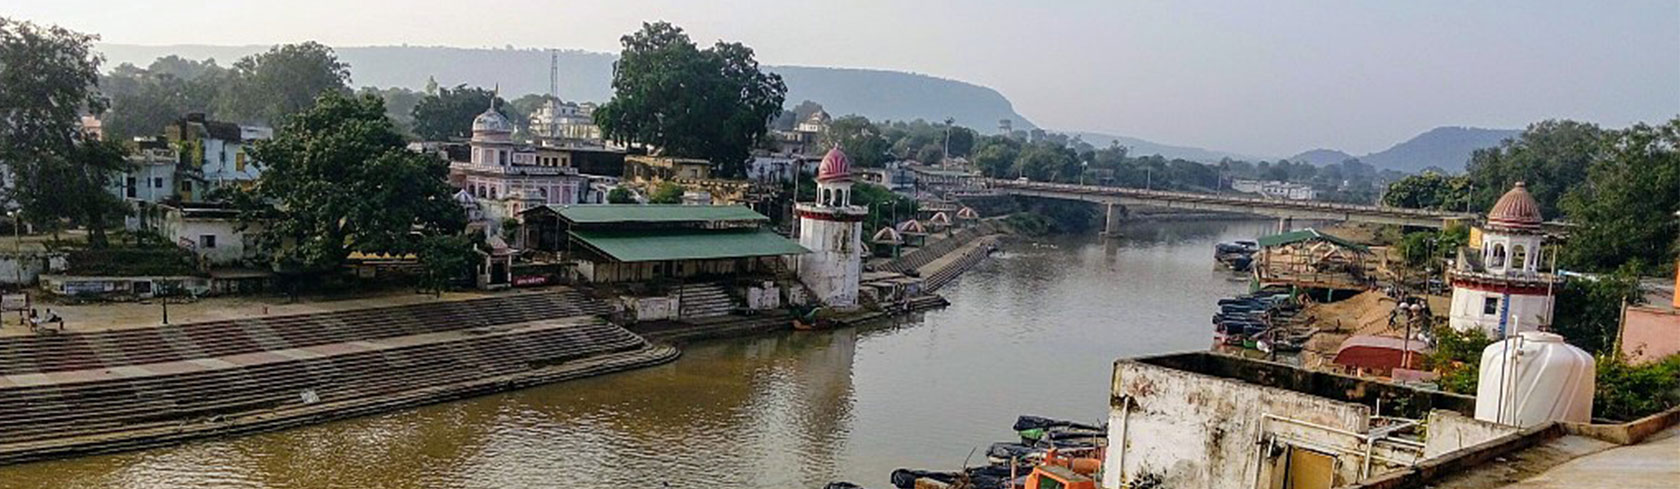 Ram Ghat Image on Chitrakoot tour packages